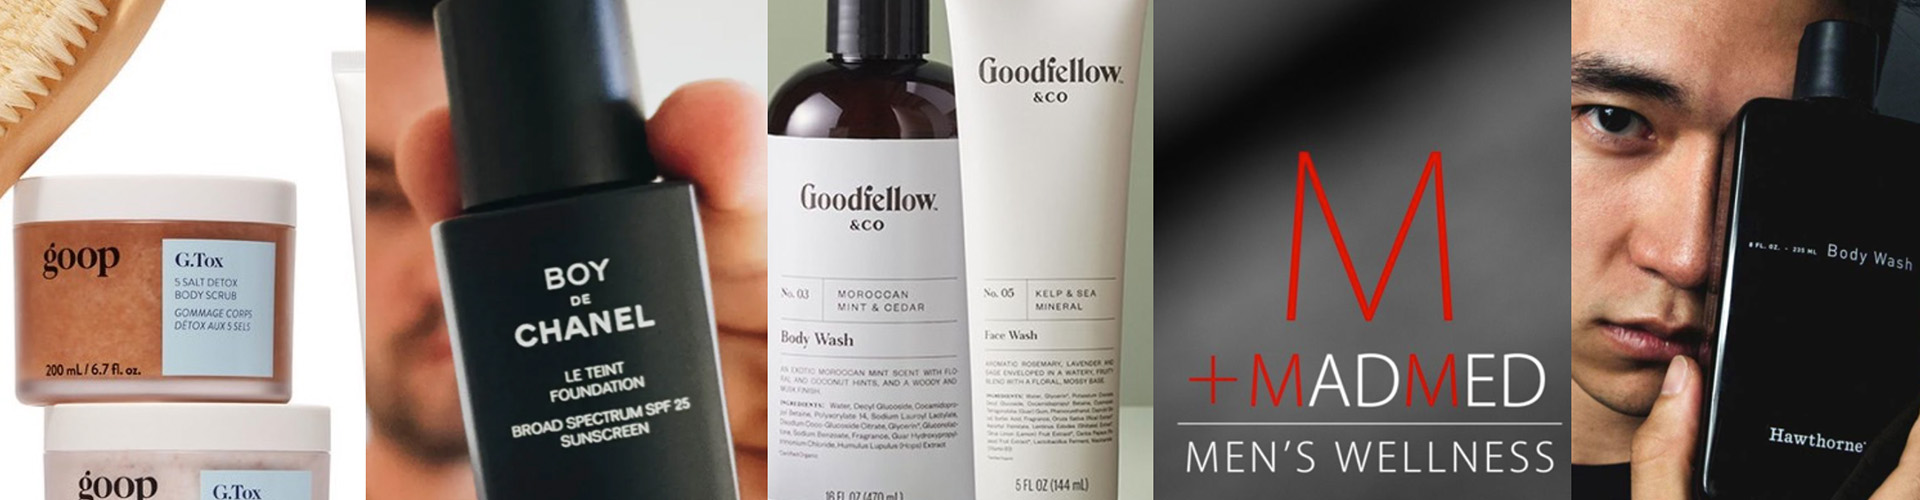 Let’s Hear It For the Boys – Report Banner featuring collage of men's body care products